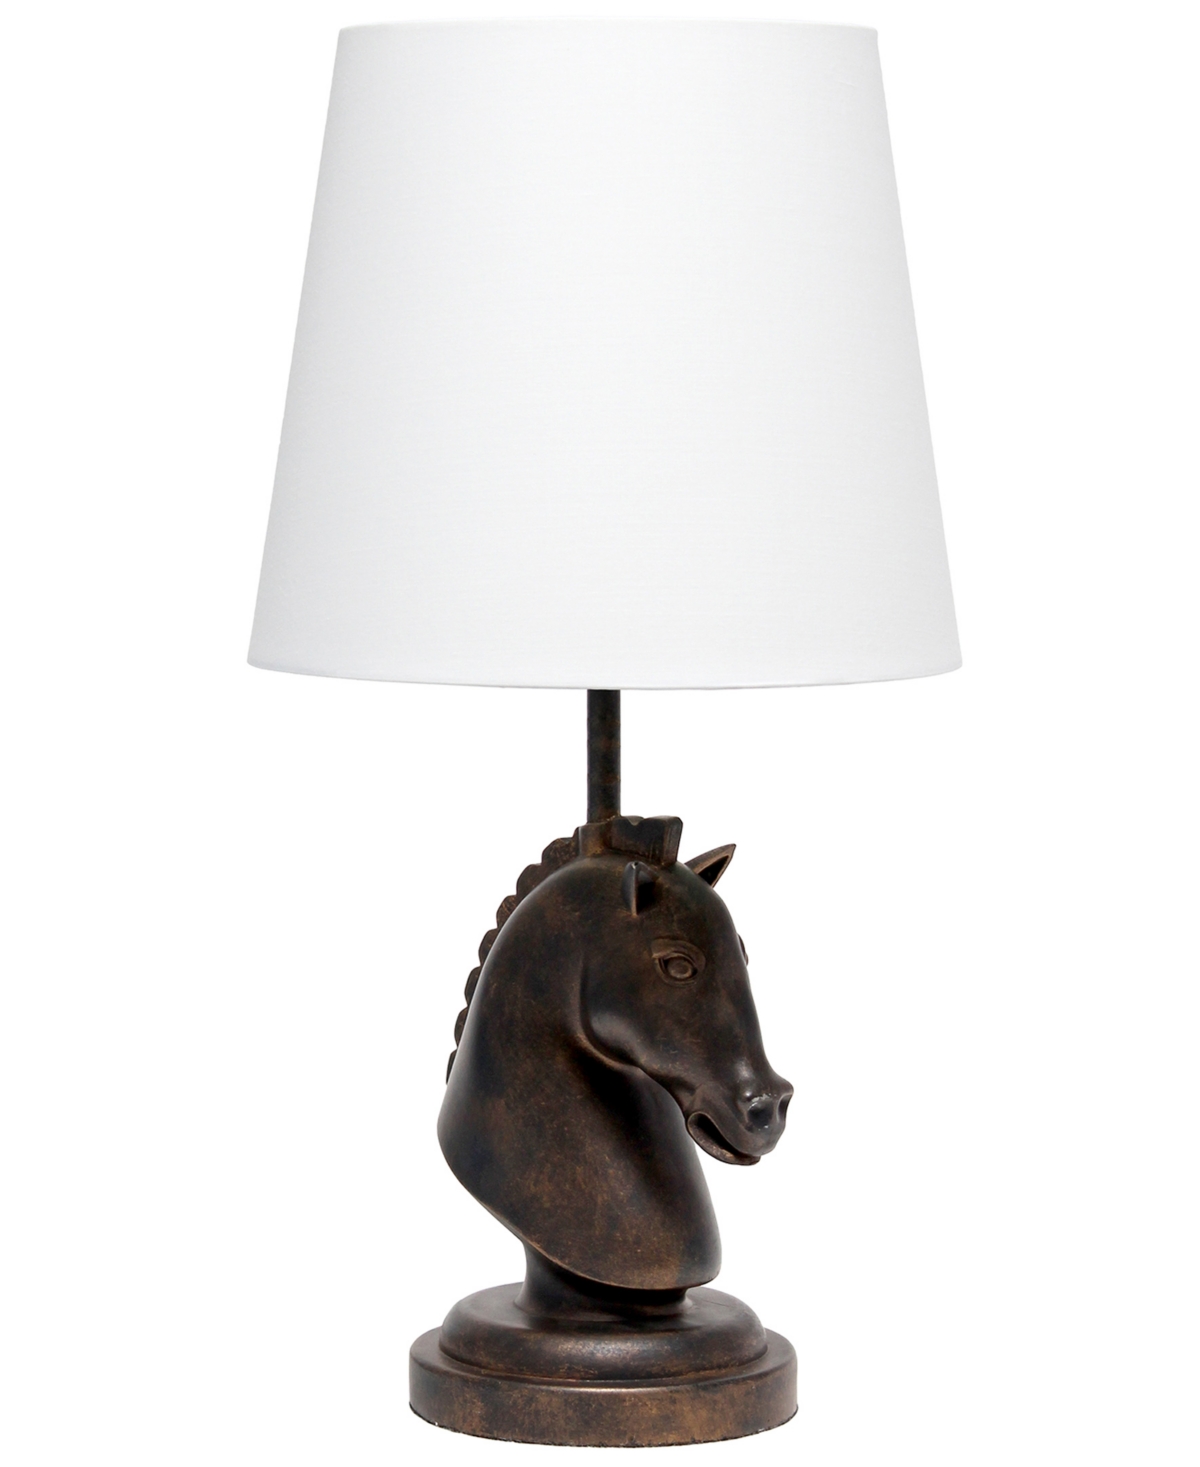 Shop Simple Designs 17.25" Tall Polyresin Decorative Chess Horse Shaped Bedside Table Desk Lamp With White Tapered Fabri In Dark Bronz